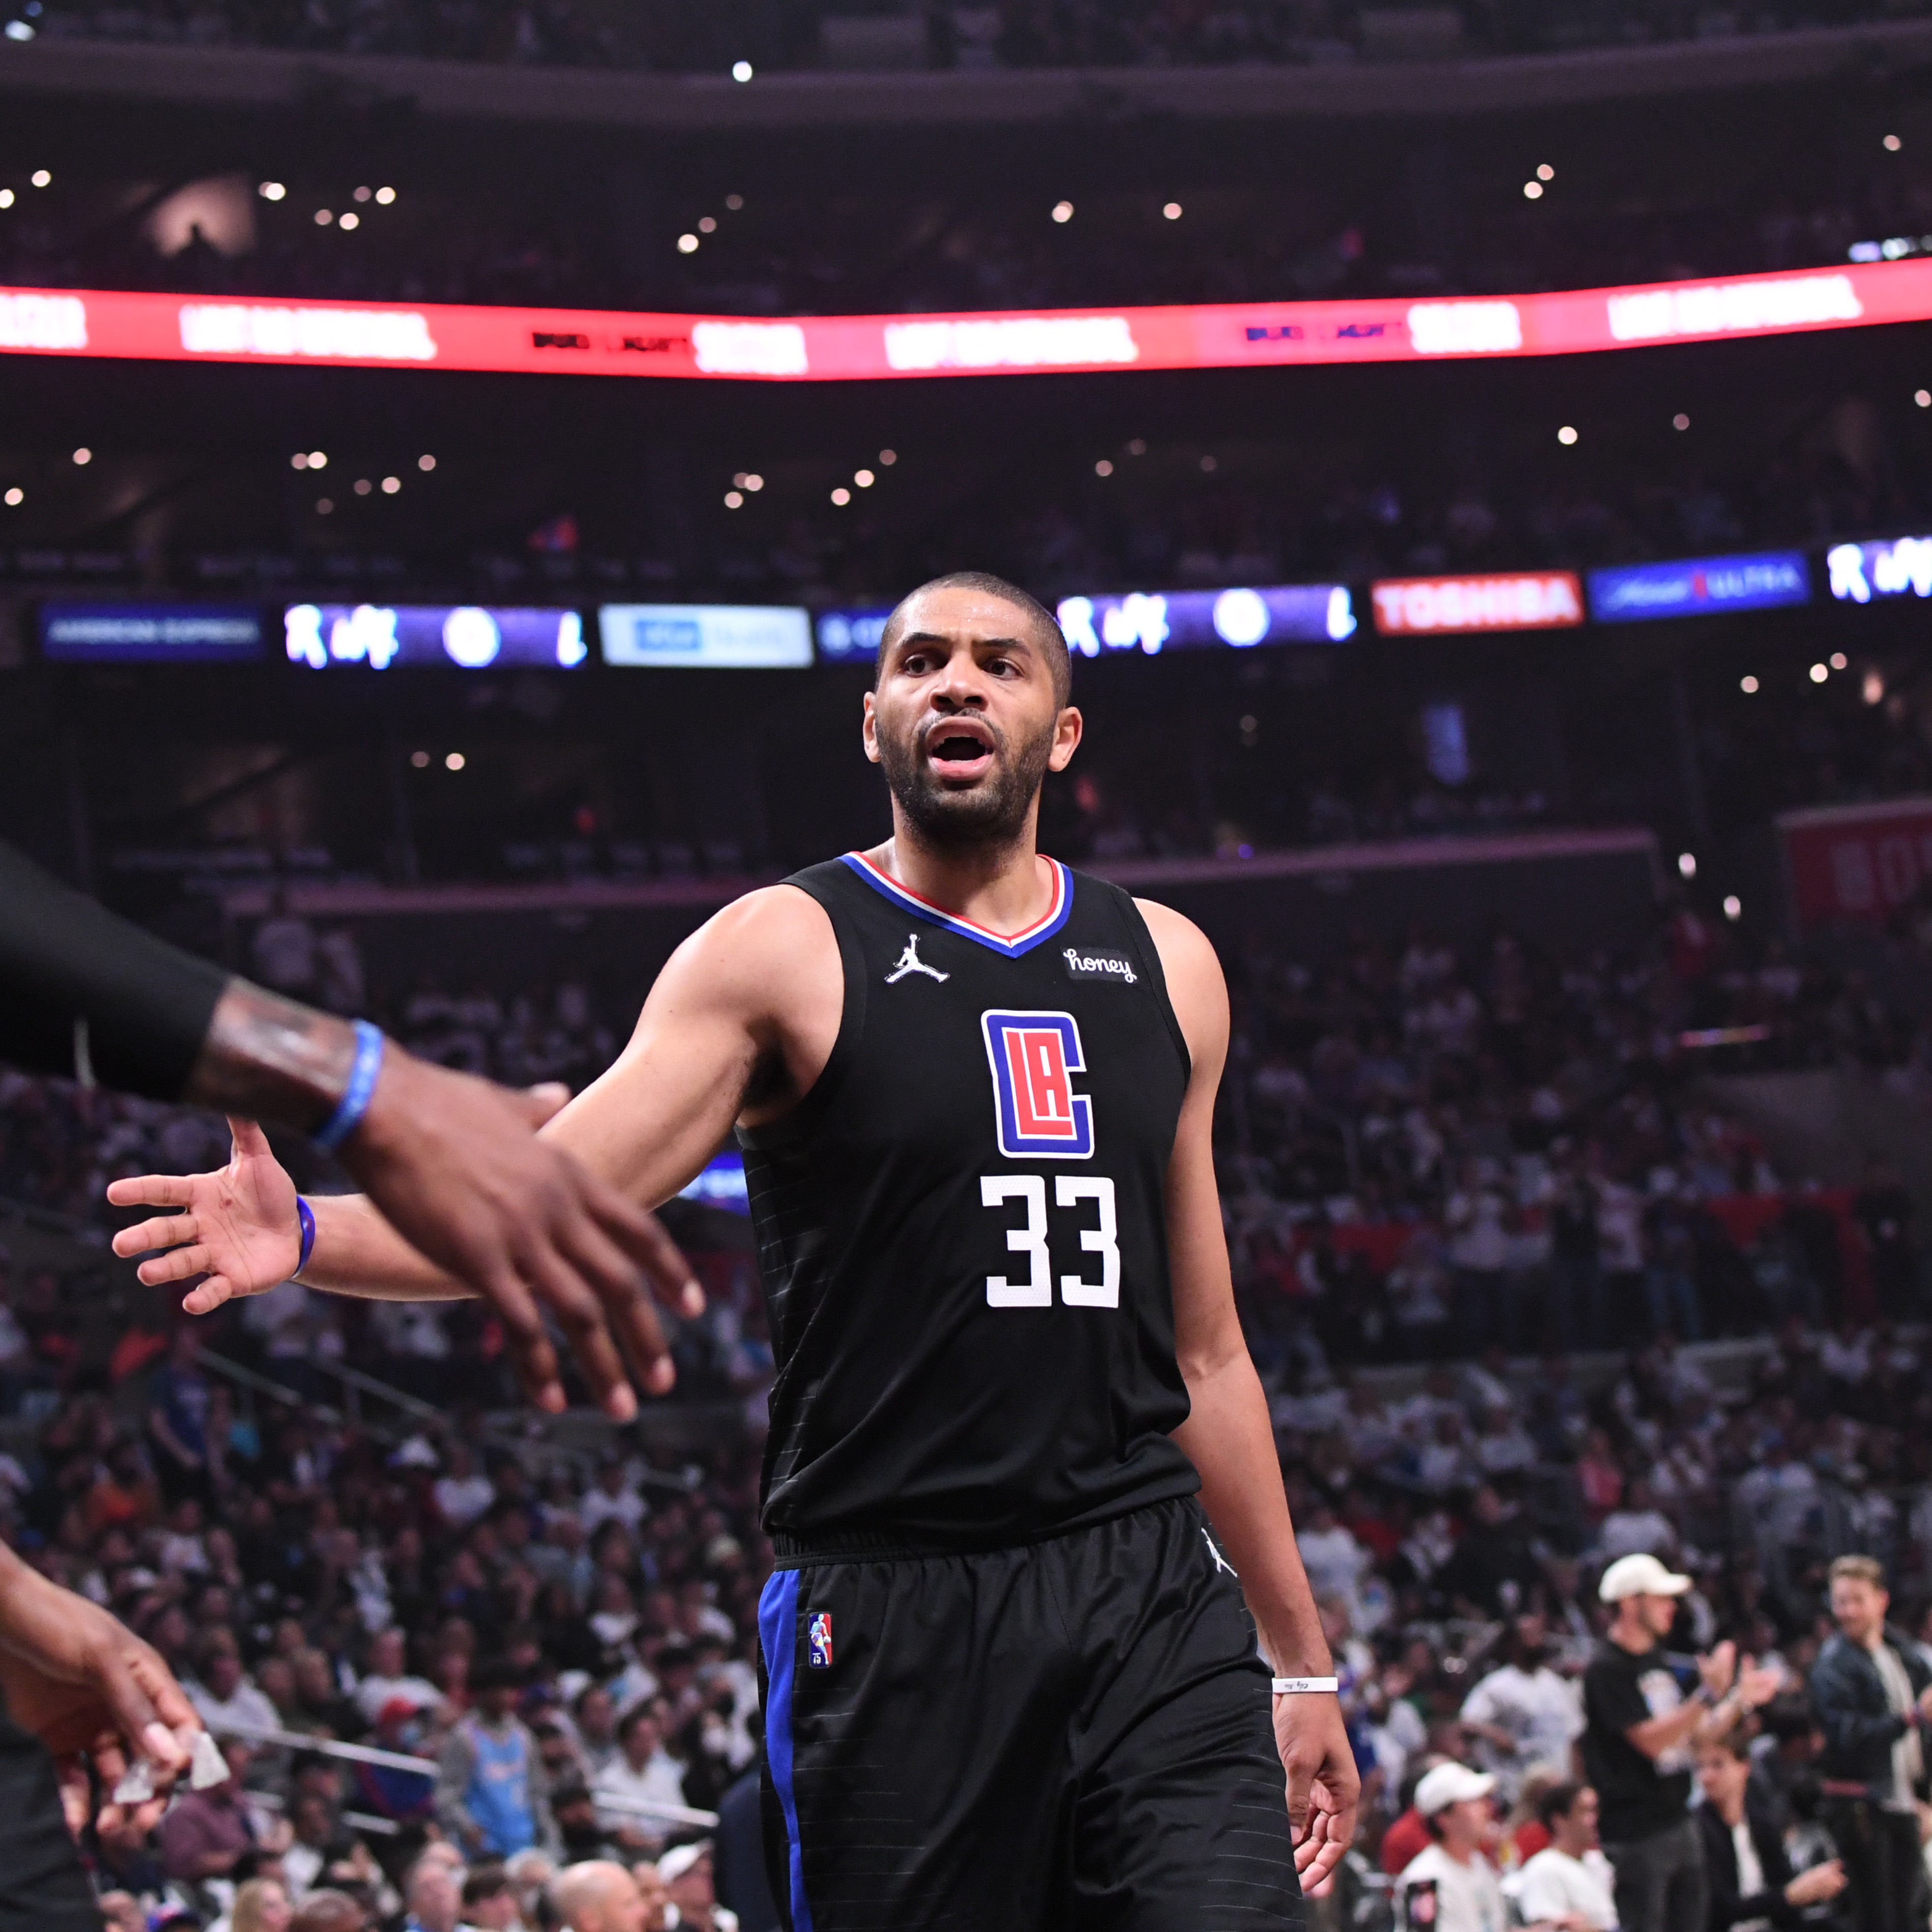 Report: Nicolas Batum Will Decline $3.3M Clippers Contract Option, Become Free Agent